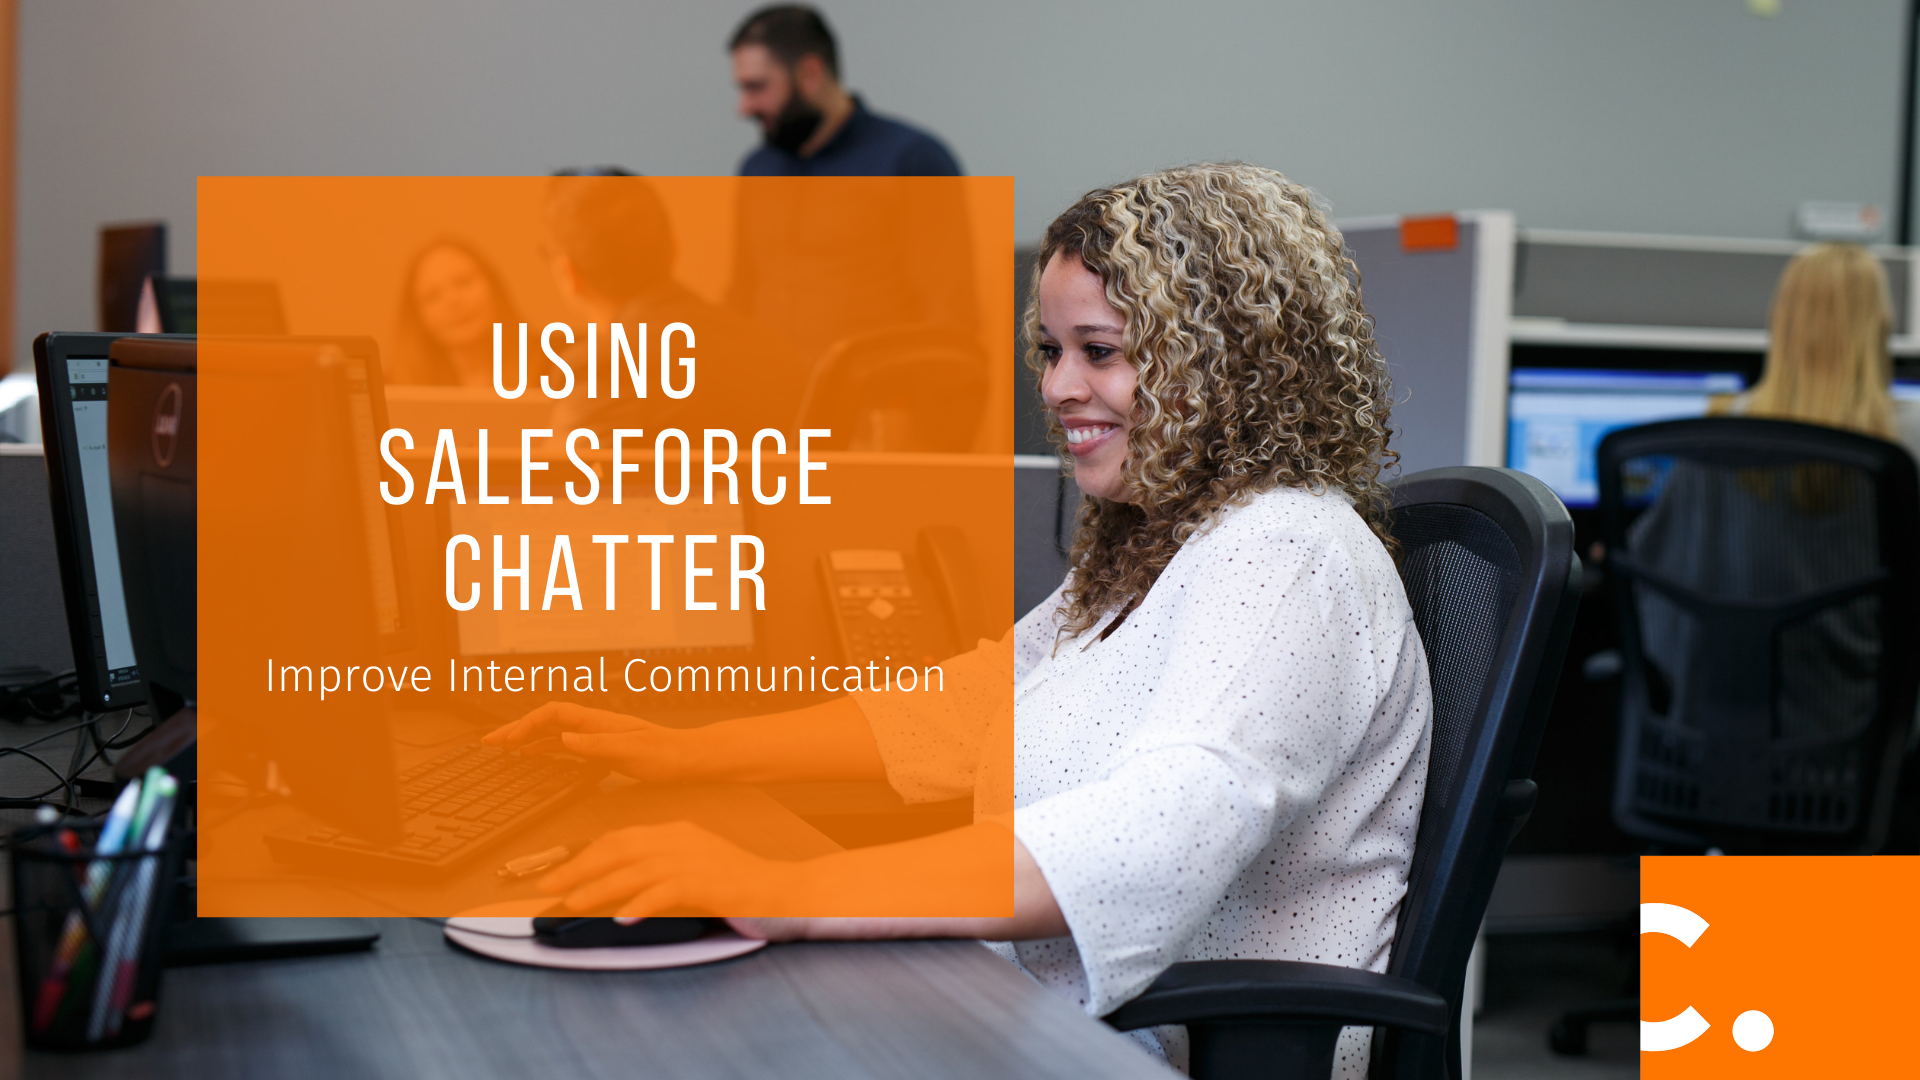 Salesforce chatter is great tool to improve internal team communications